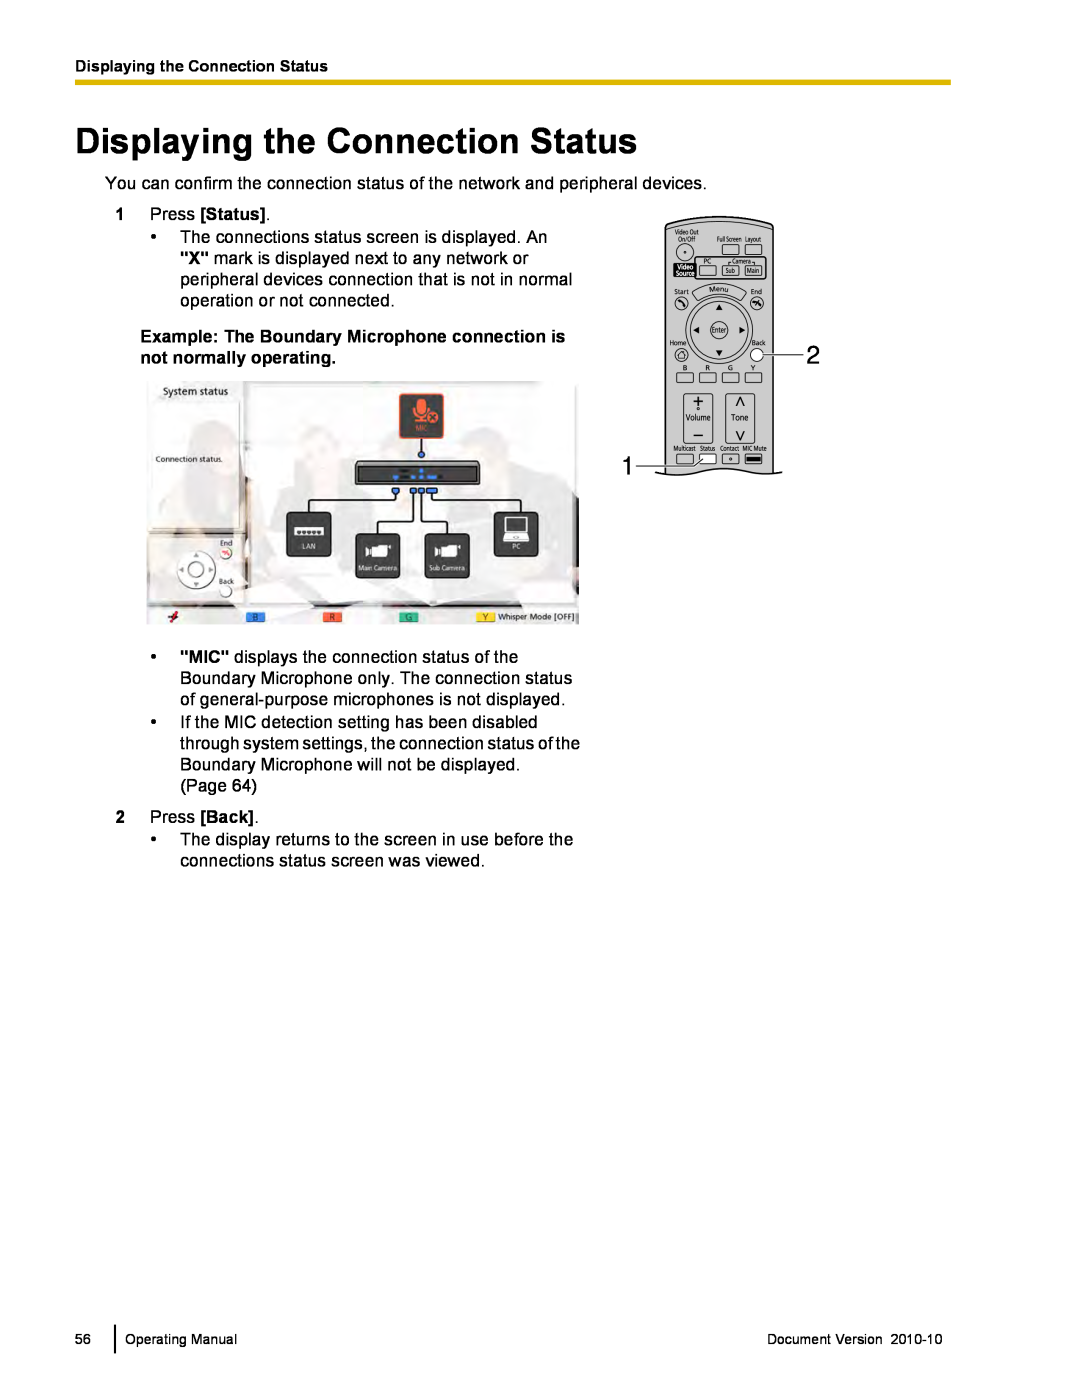 Panasonic KX-VC500 manual Displaying the Connection Status, 1Press Status, Example: The Boundary Microphone connection is 